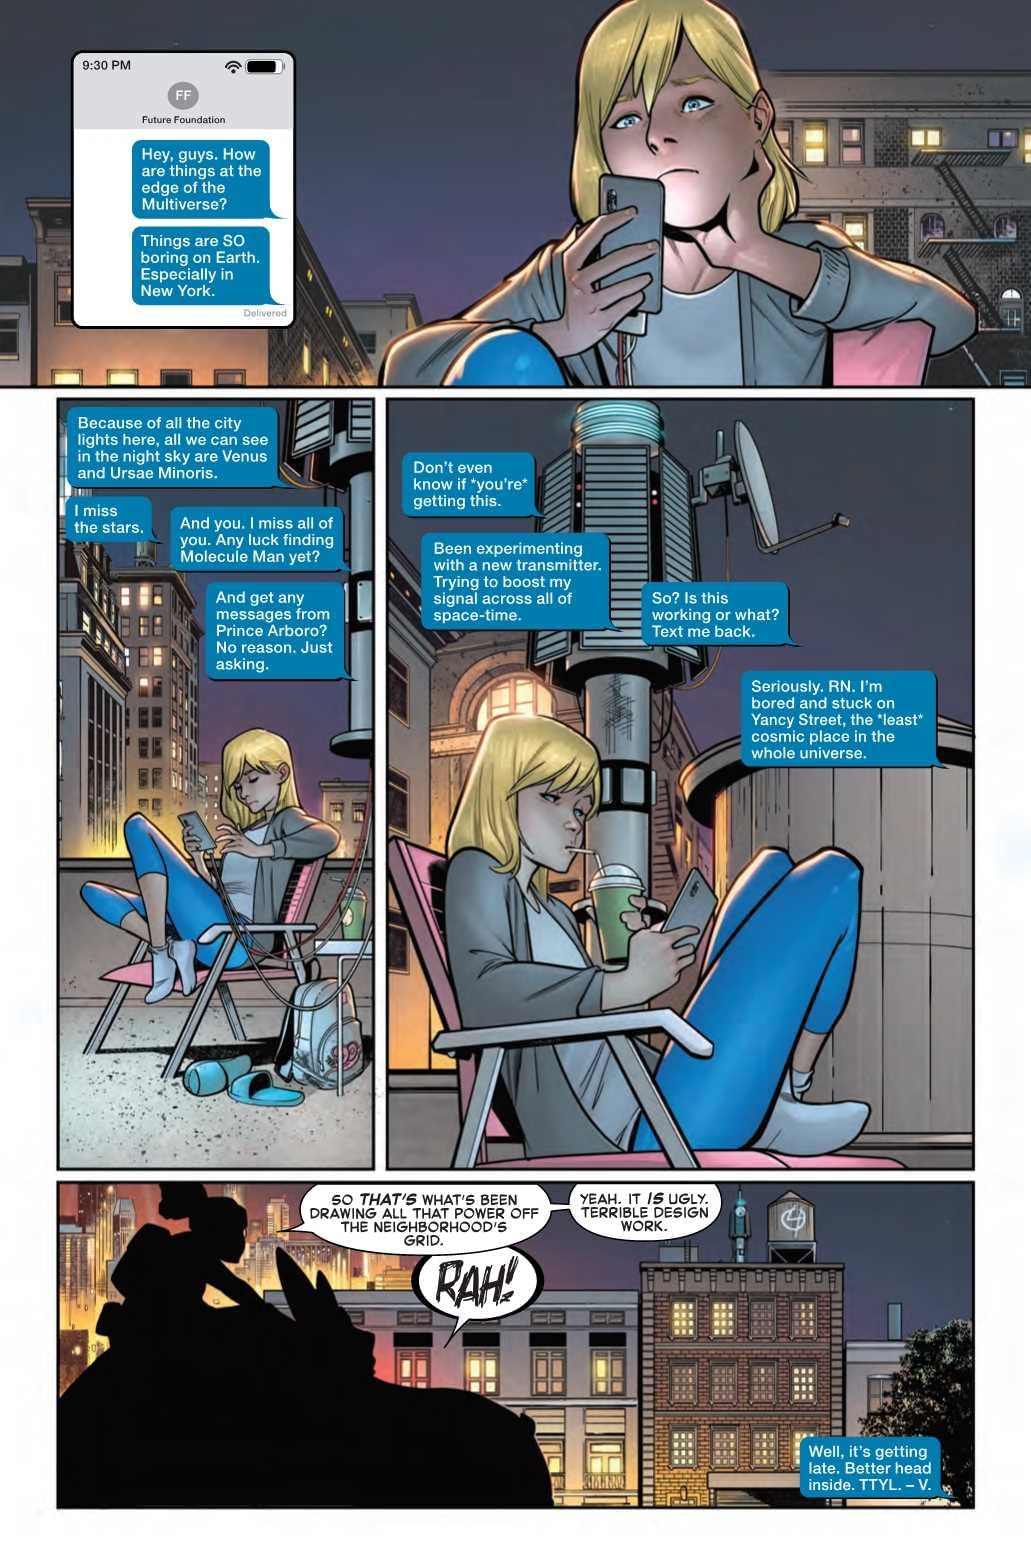 Franklin Richards, Sulky Teenager (Fantastic Four #10 Preview)